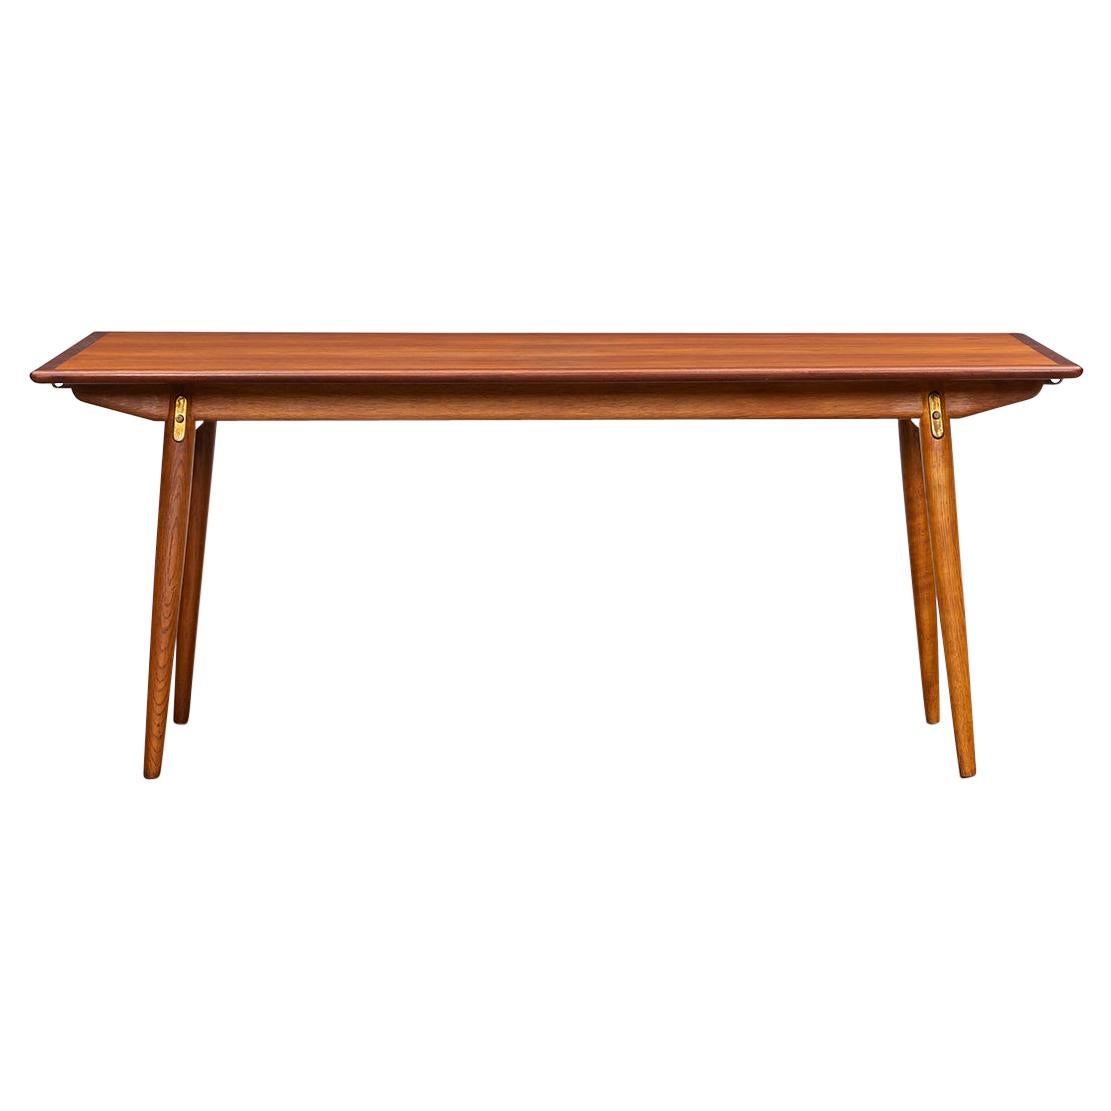 1950s Brown Teak and Oak Extendable Dining Table by Hans Wegner